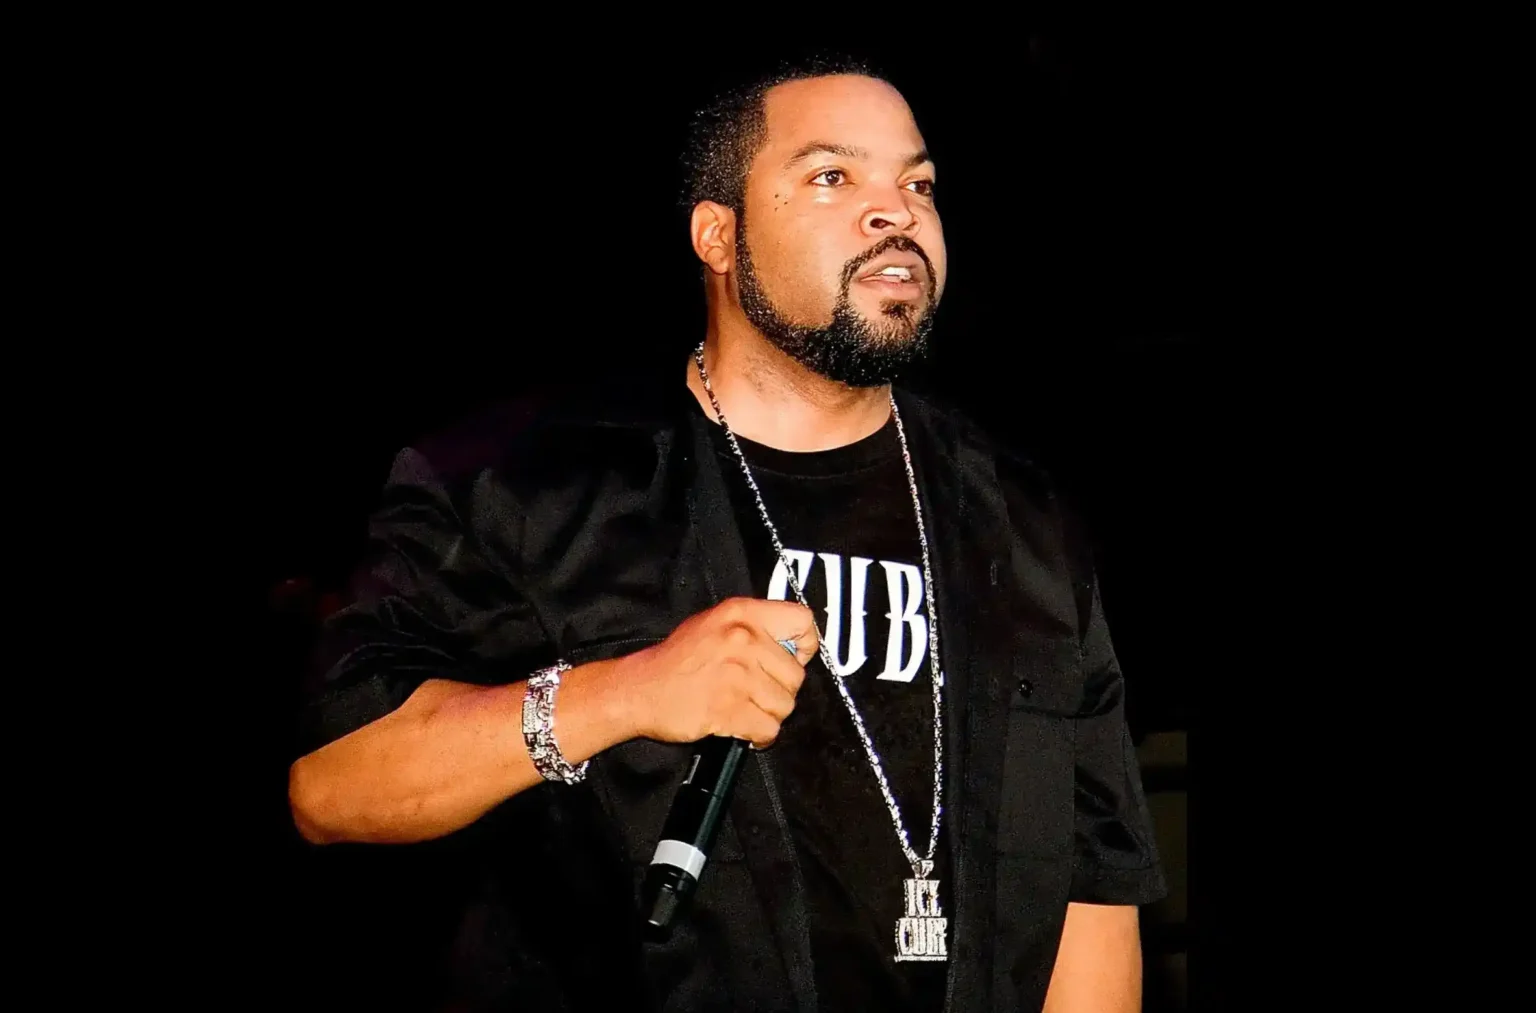 Why Ice Cube’s Move is Not Surprising, According to a Former Political Strategist